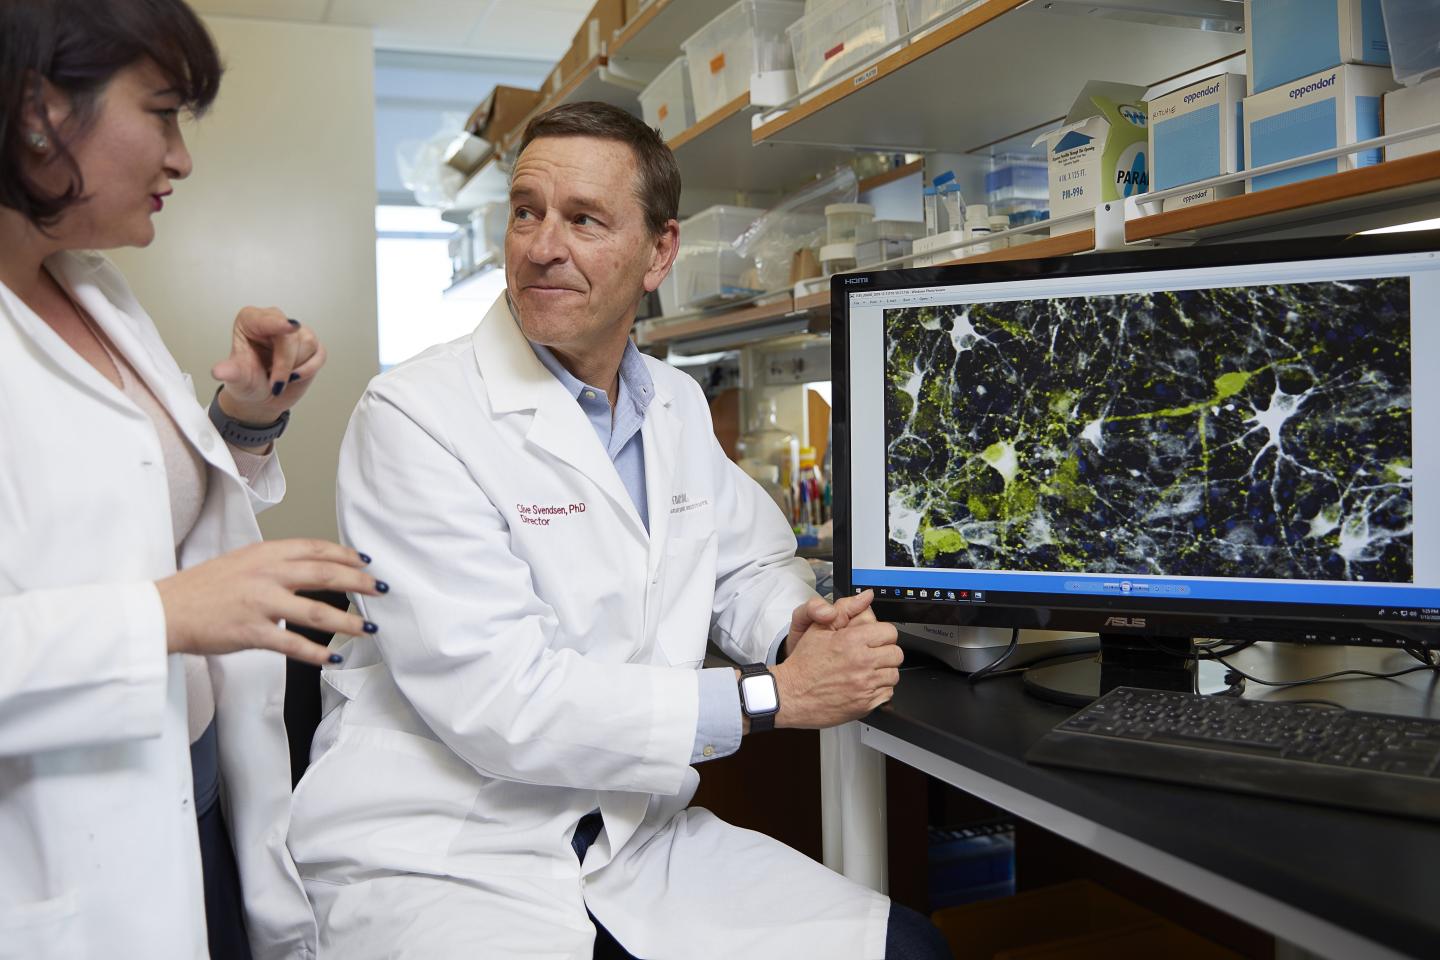 Clive Svendsen, PhD, director of the Cedars-Sinai Board of Governors Regenerative Medicine Institute, right, and Nur Yucer, PhD, a project scientist, discuss a microscope image of dopamine neurons